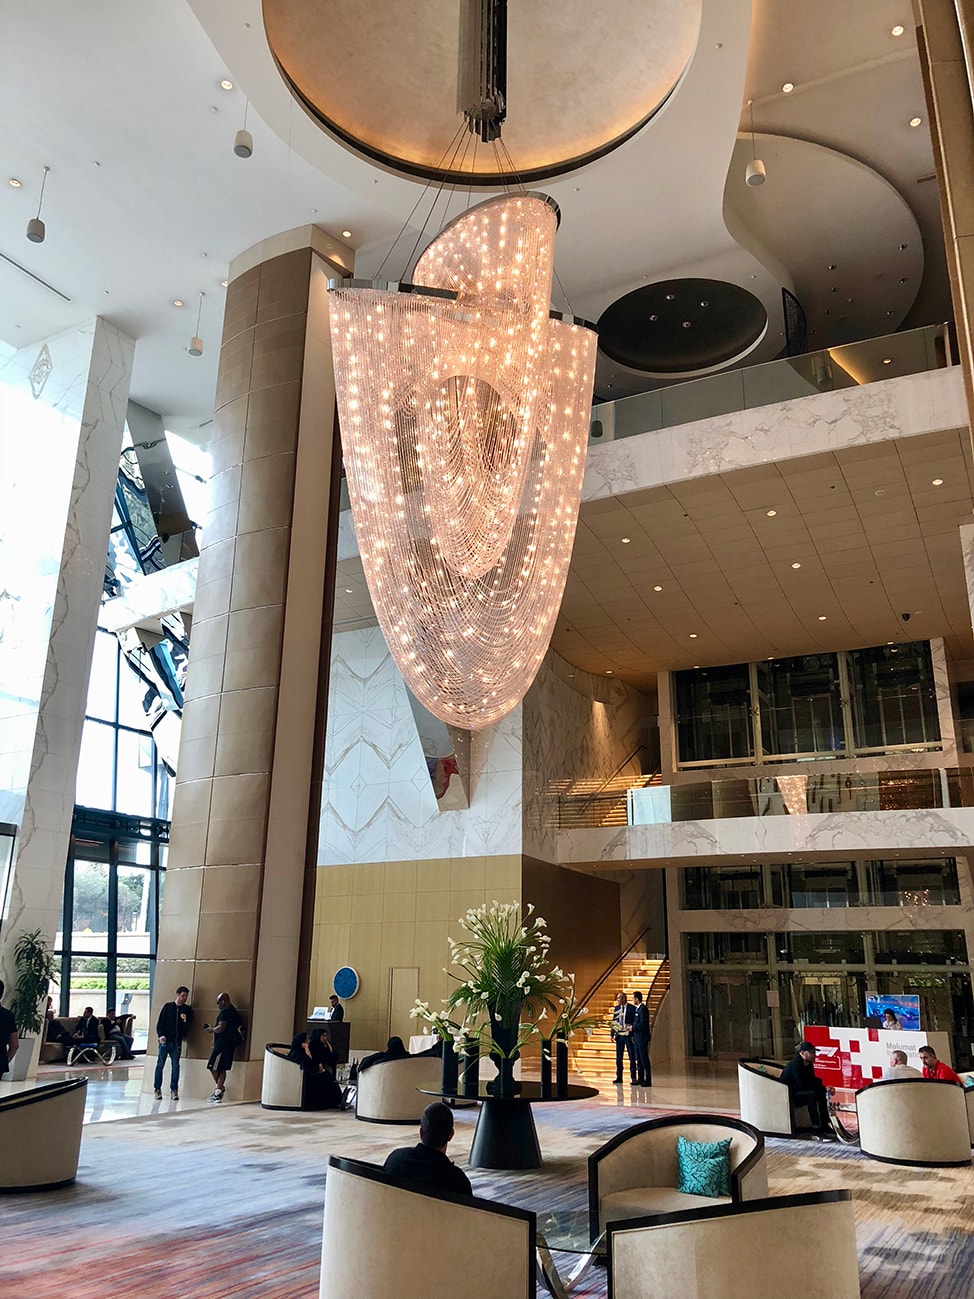 The dramatic chandelier in the lobby of the Fairmont Baku Flame Towers hotel.